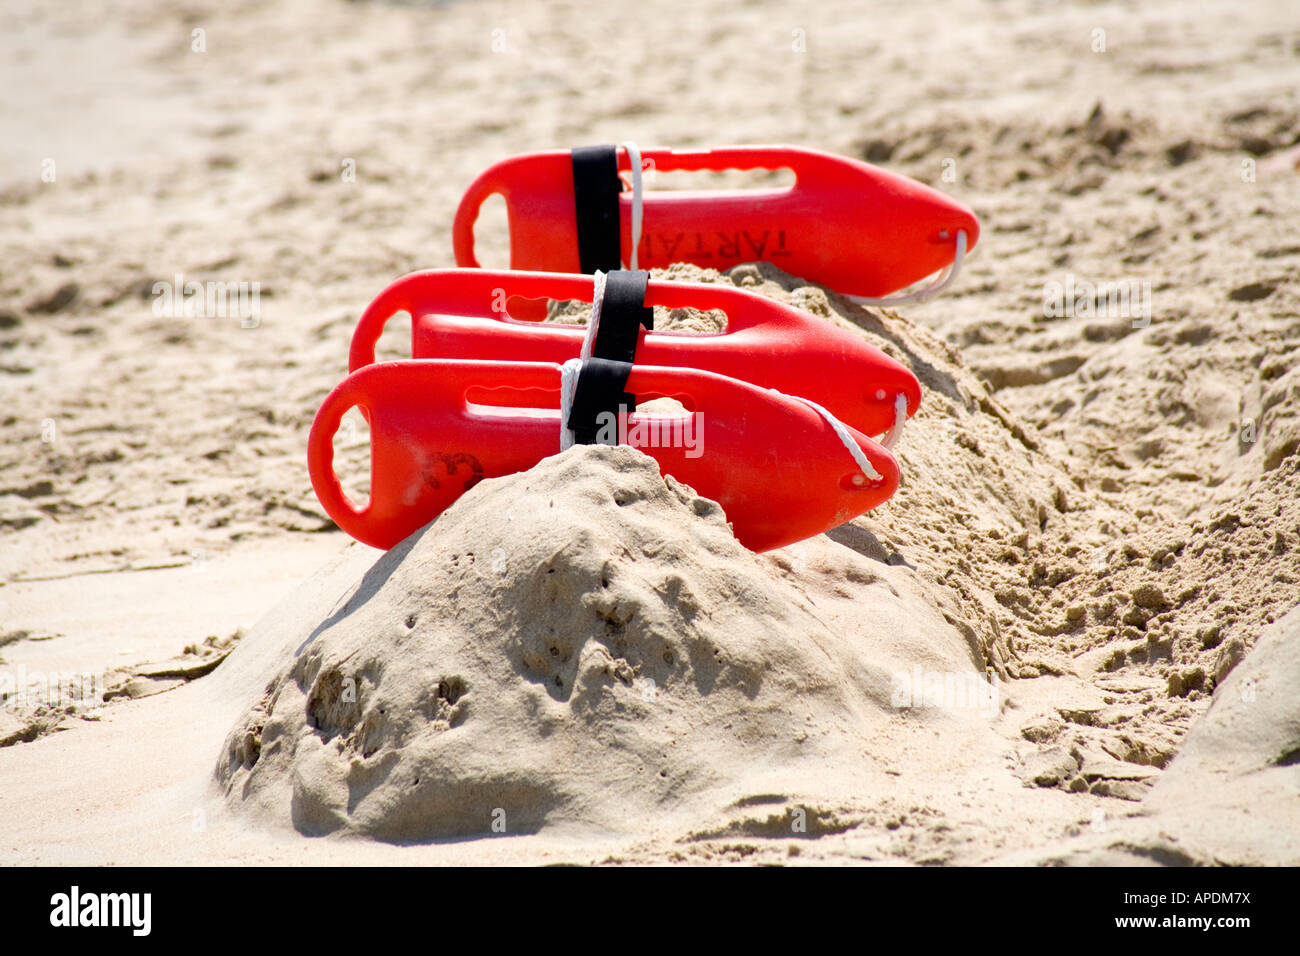 A view of lifeguard rescue cans on a beach by the ocean Stock Photo - Alamy